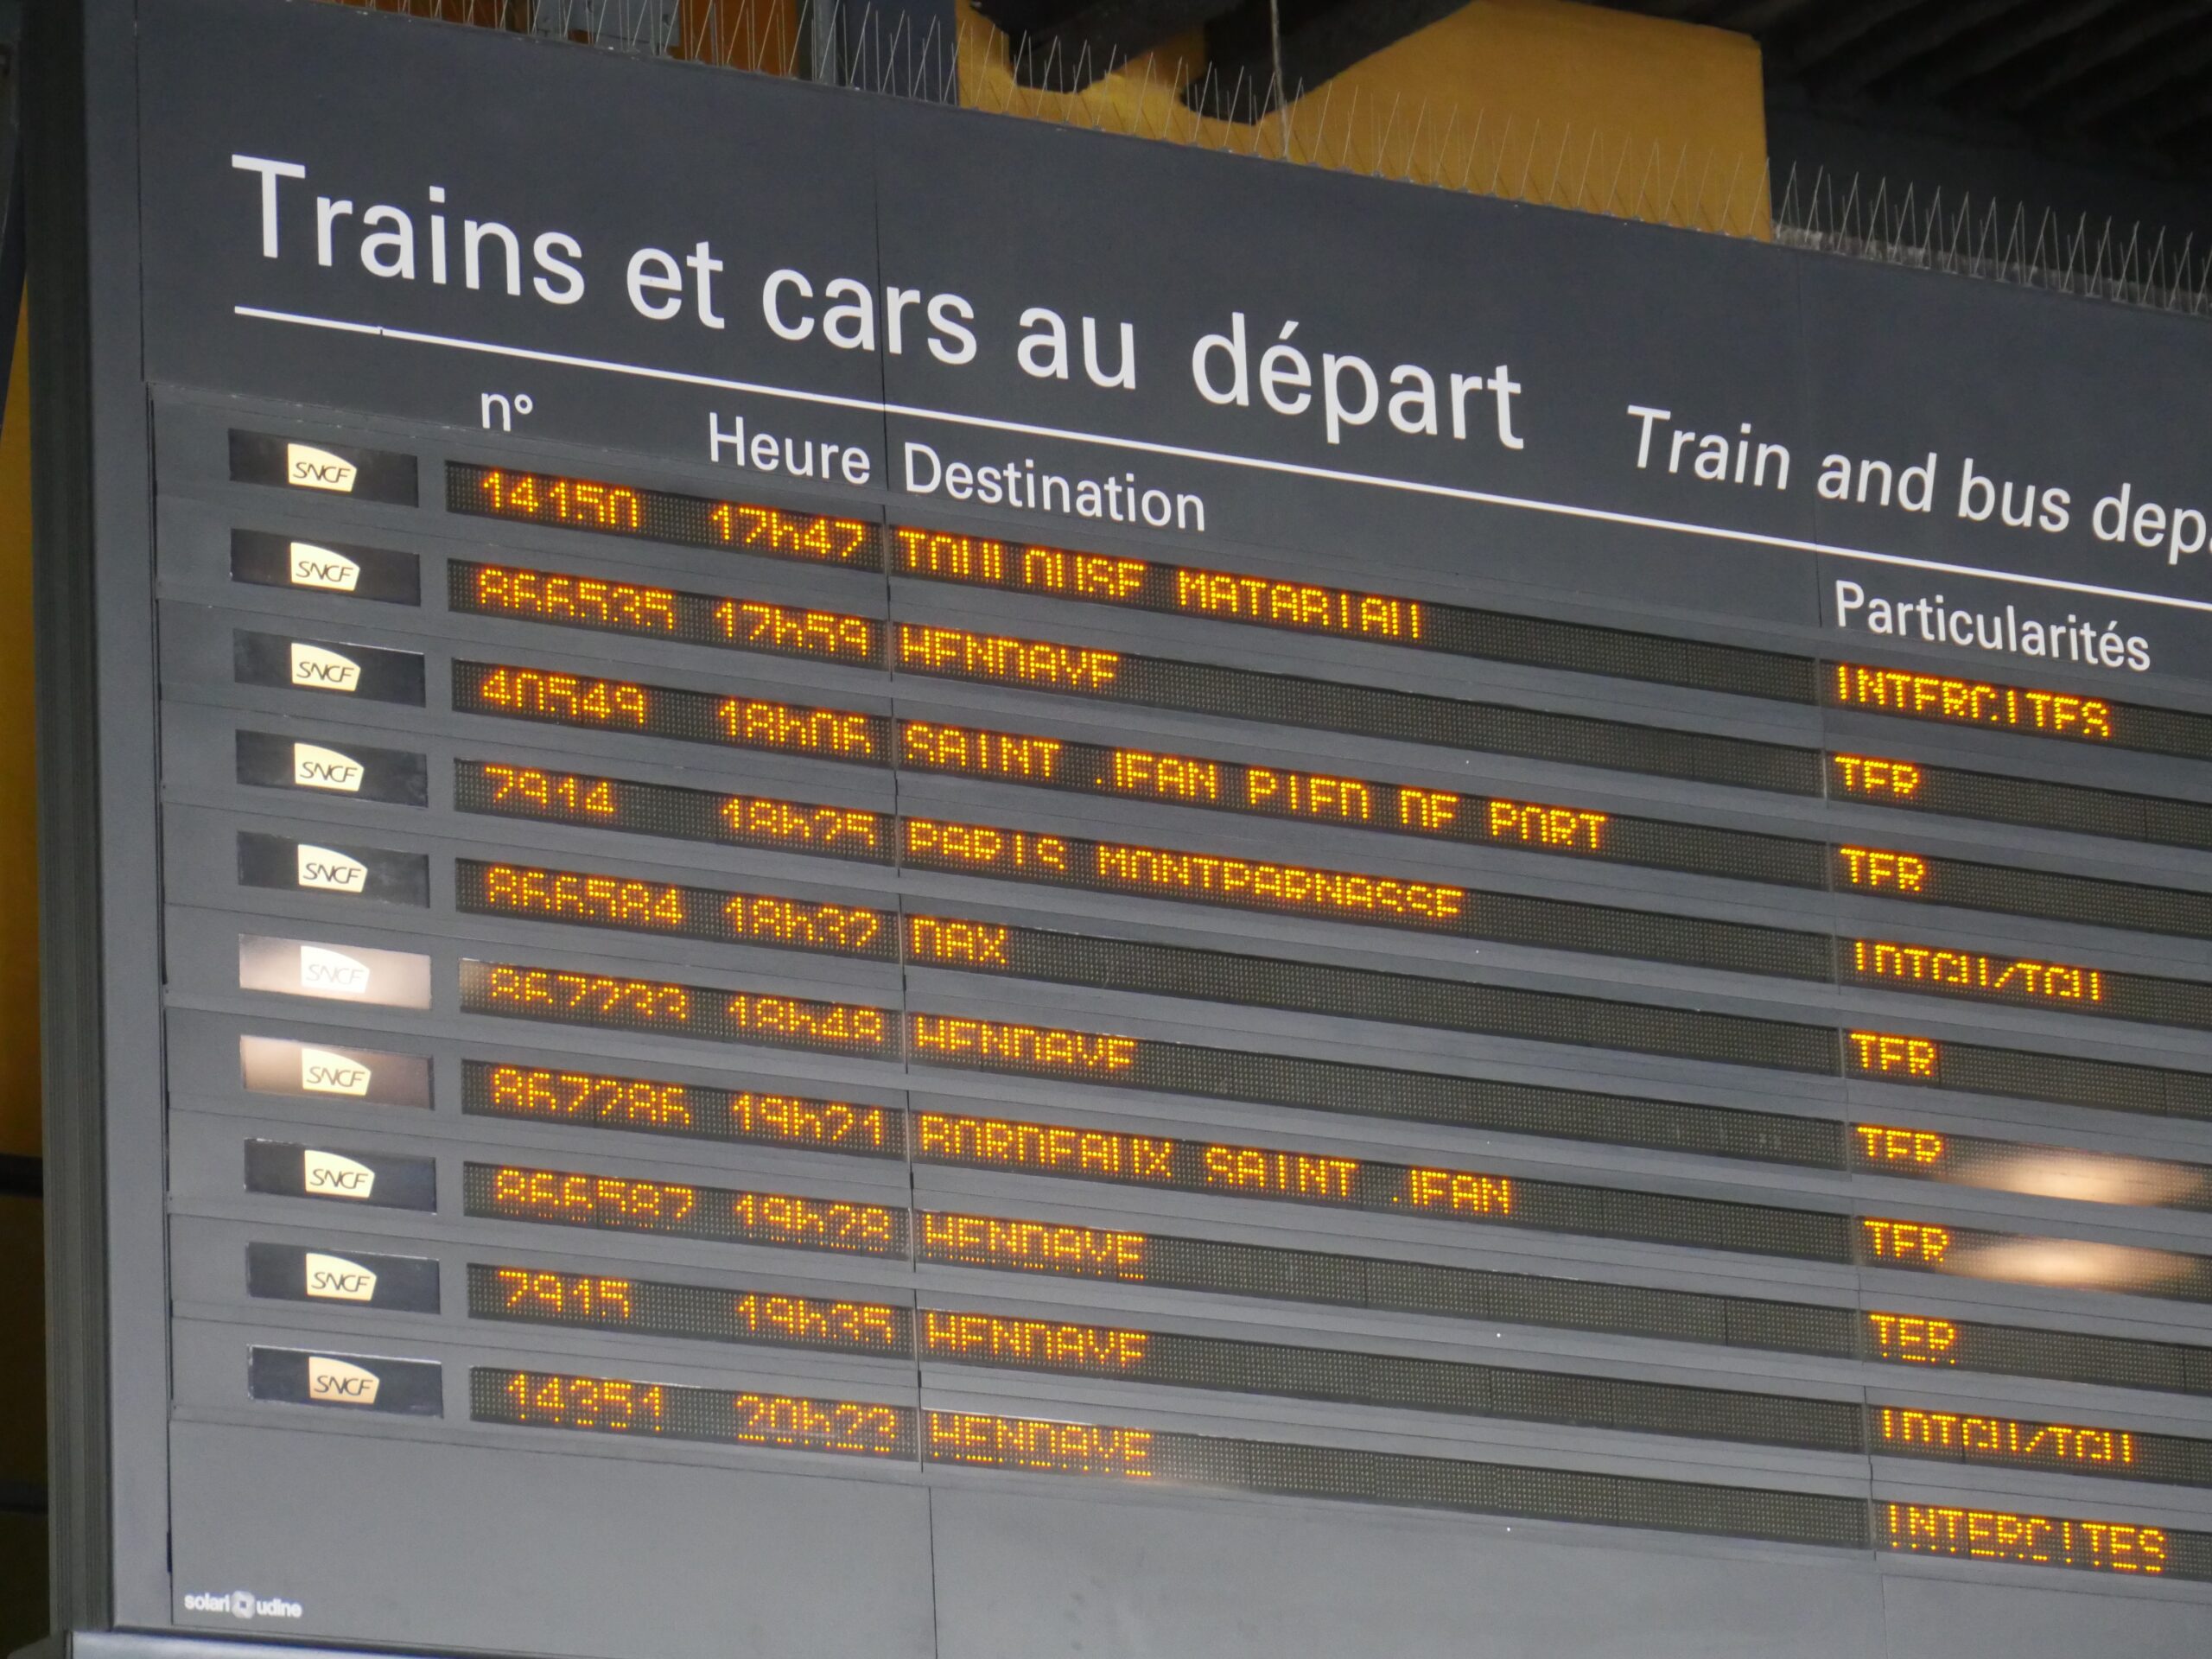 A departure board in the train station in Bayonne, France shows a departure to Saint-Jean-Pied-de-Port, where most people begin the Camino de Santiago.